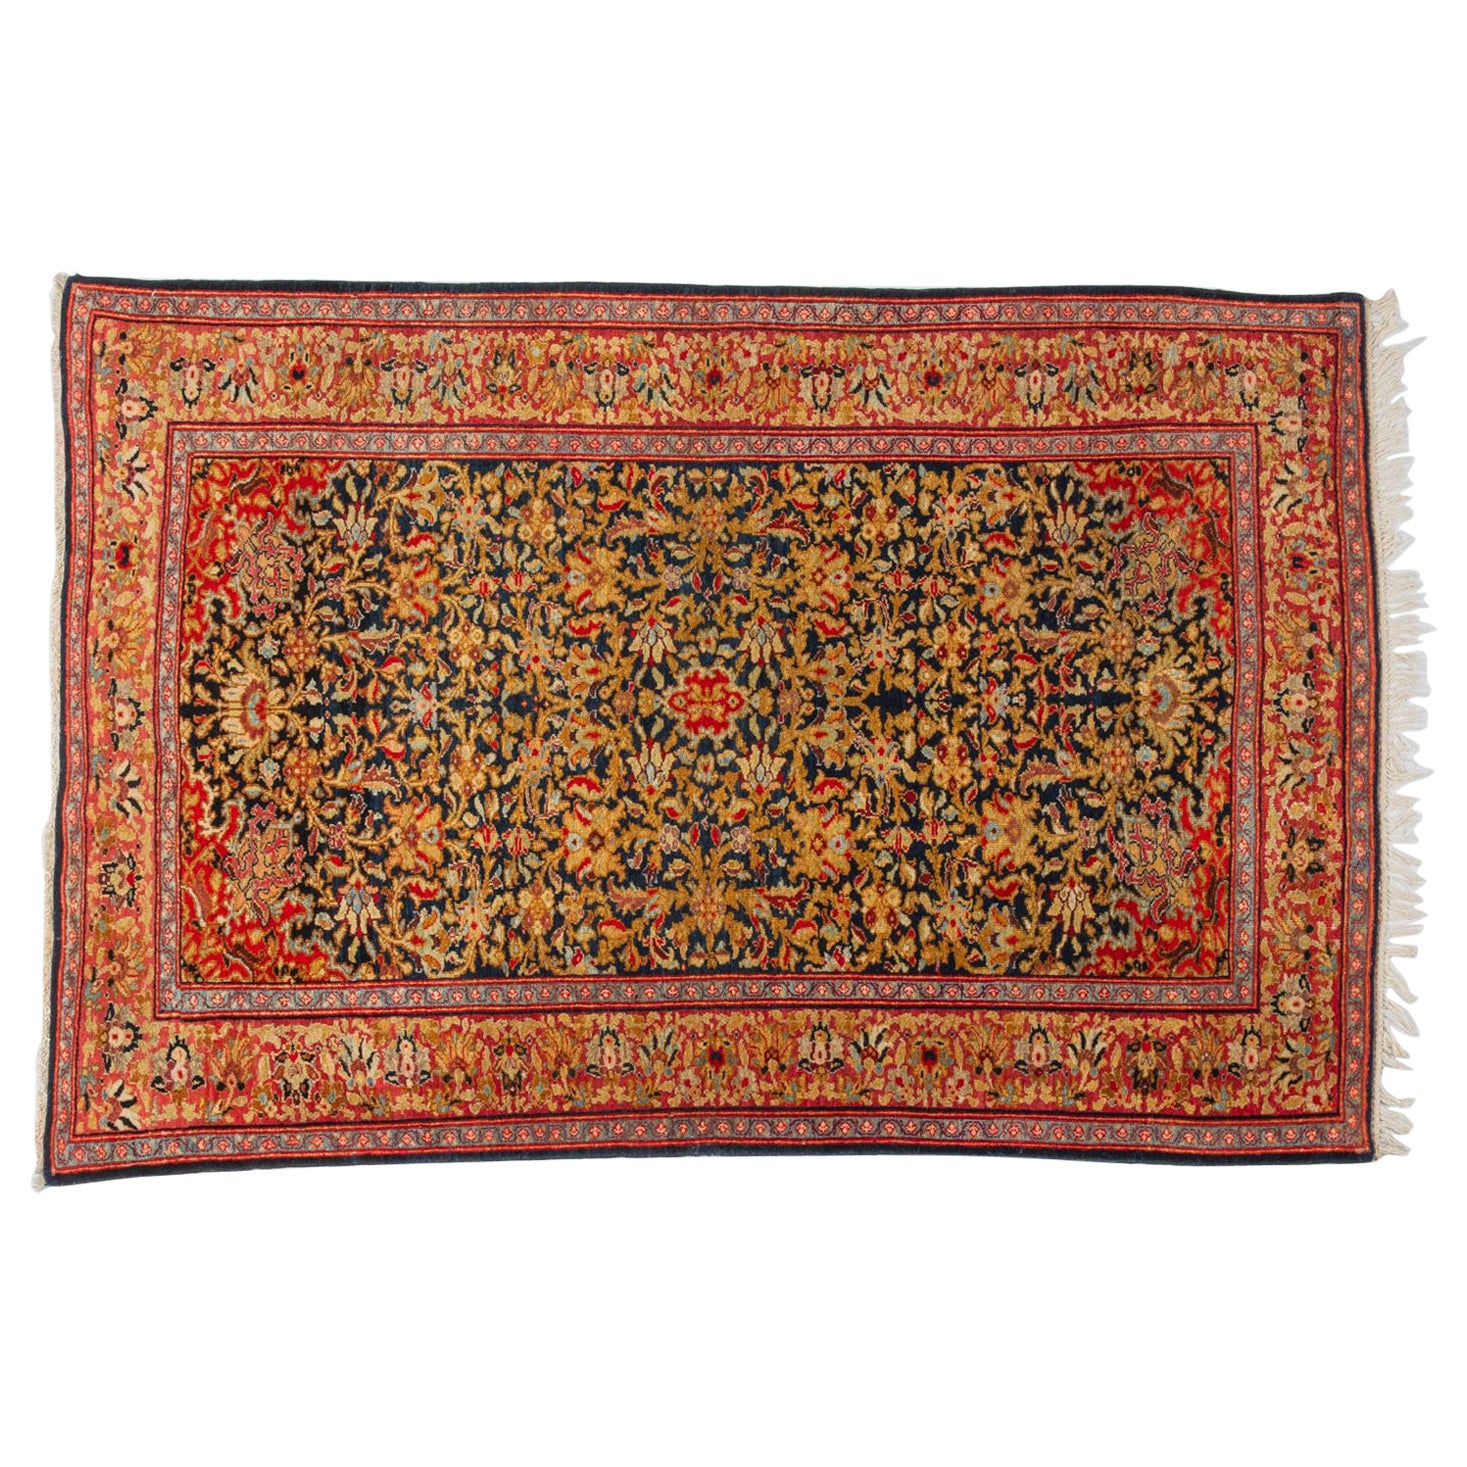 Agra Little Carpet Extremely Fine For Sale